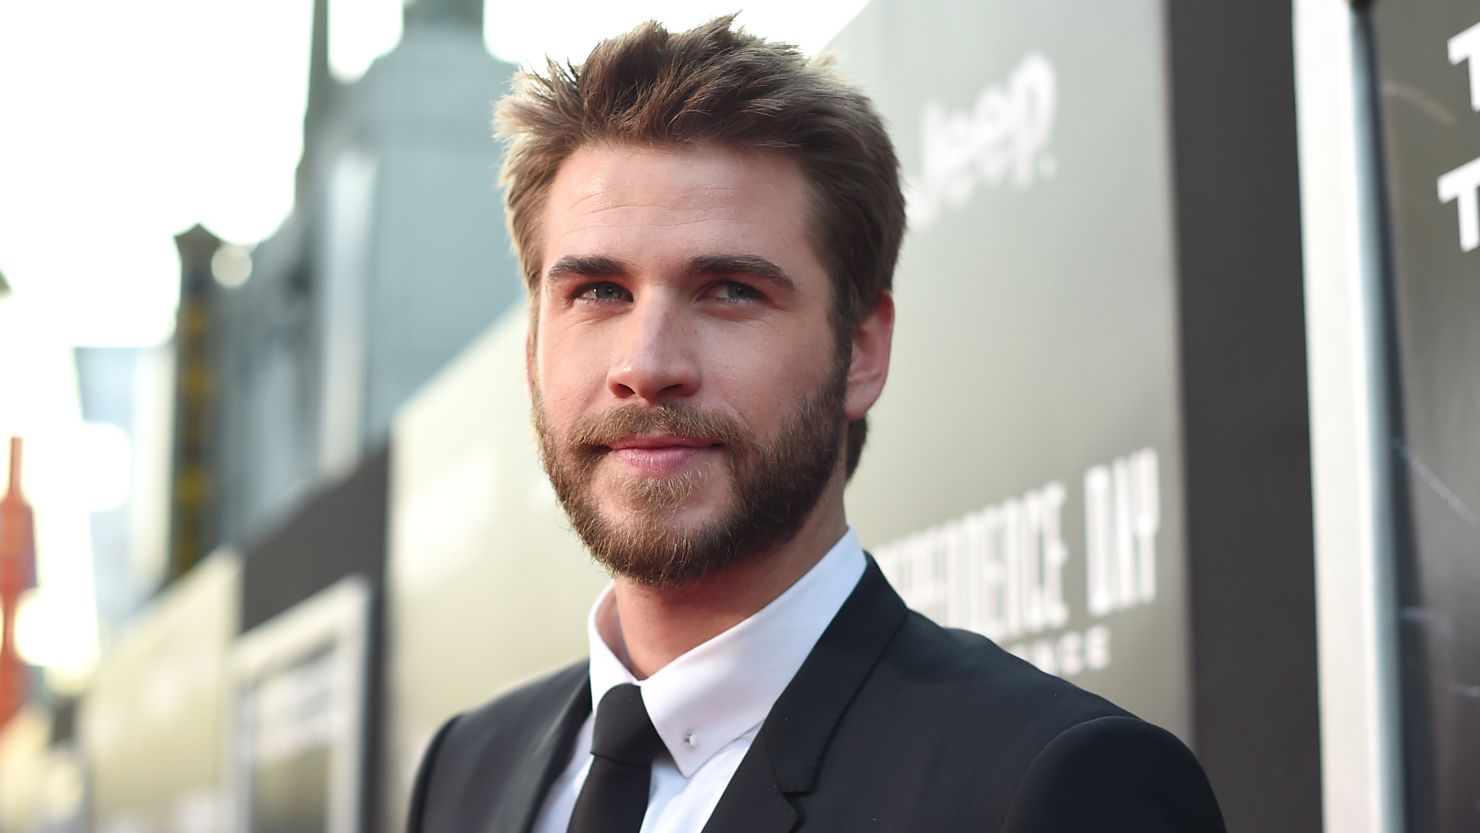 Liam Hemsworth says he feels better since becoming a vegan.